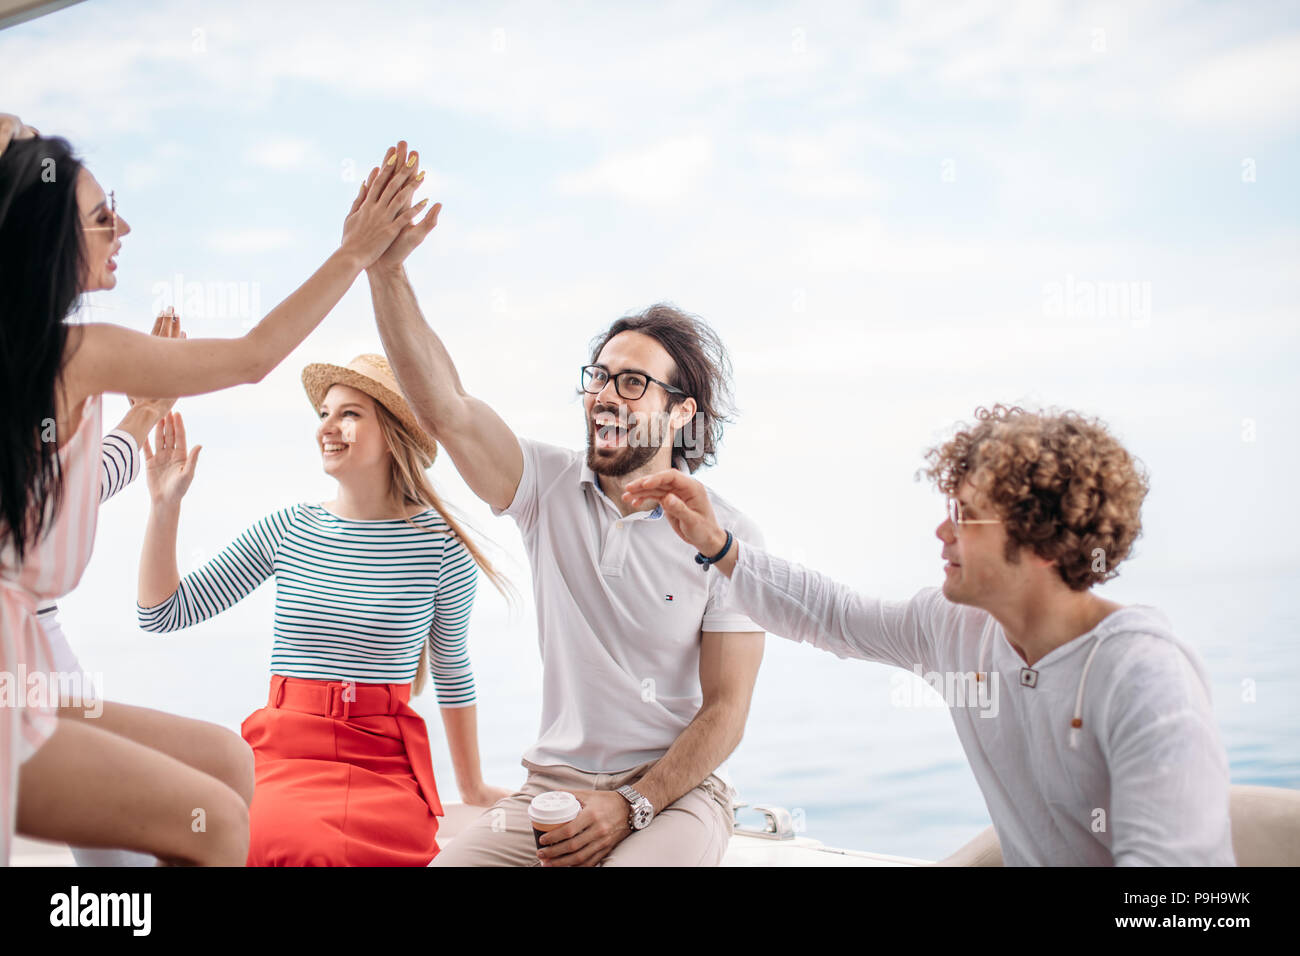 Happy cheerful young friends giving a high five slapping each others hand in congratulations, enjoying marine cruise on comfortable yacht Stock Photo